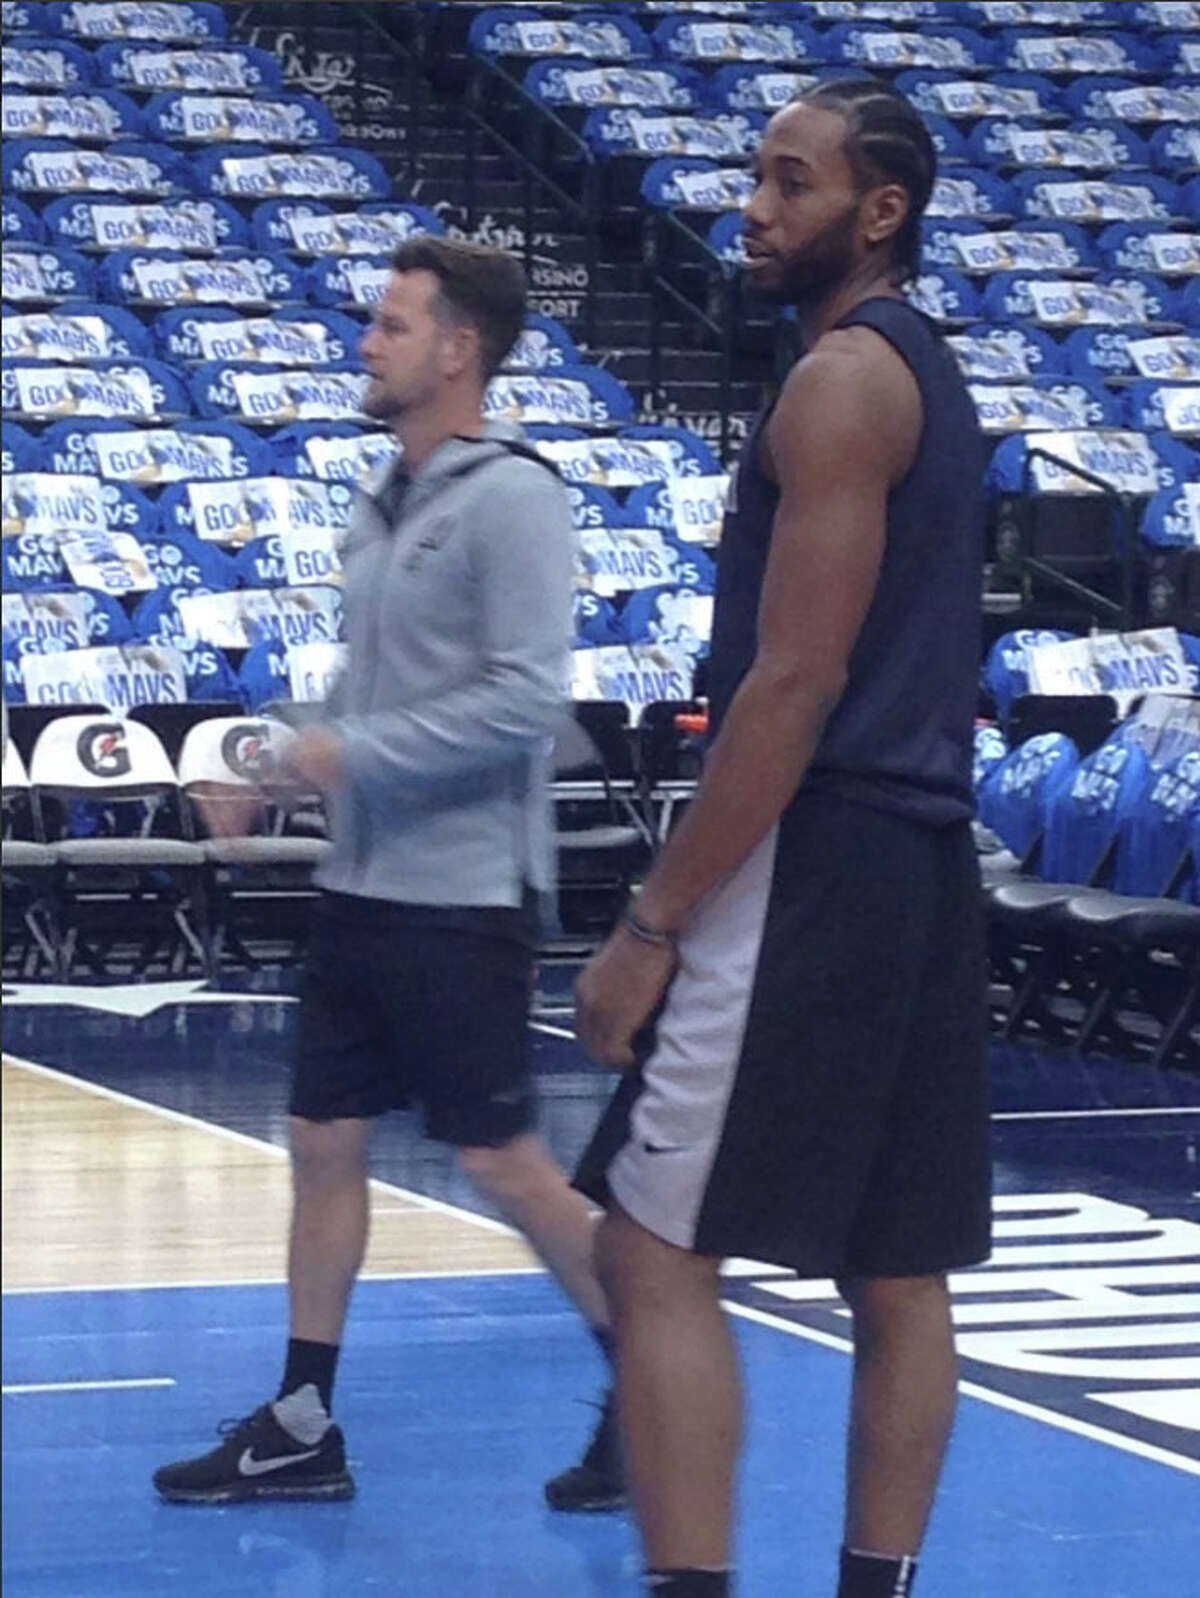 The Spurs' Kawhi Leonard participates in the team shootaround Tuesday, Dec. 12, 2017, in Dallas as the Silver & Black get ready to face the Mavericks. Coach Gregg Popovich confirmed that Leonard would play Tuesday. It will be his first game action since May 14, 2017, when the Spurs fell 113-111 in Game 1 of the Western Conference Finals.